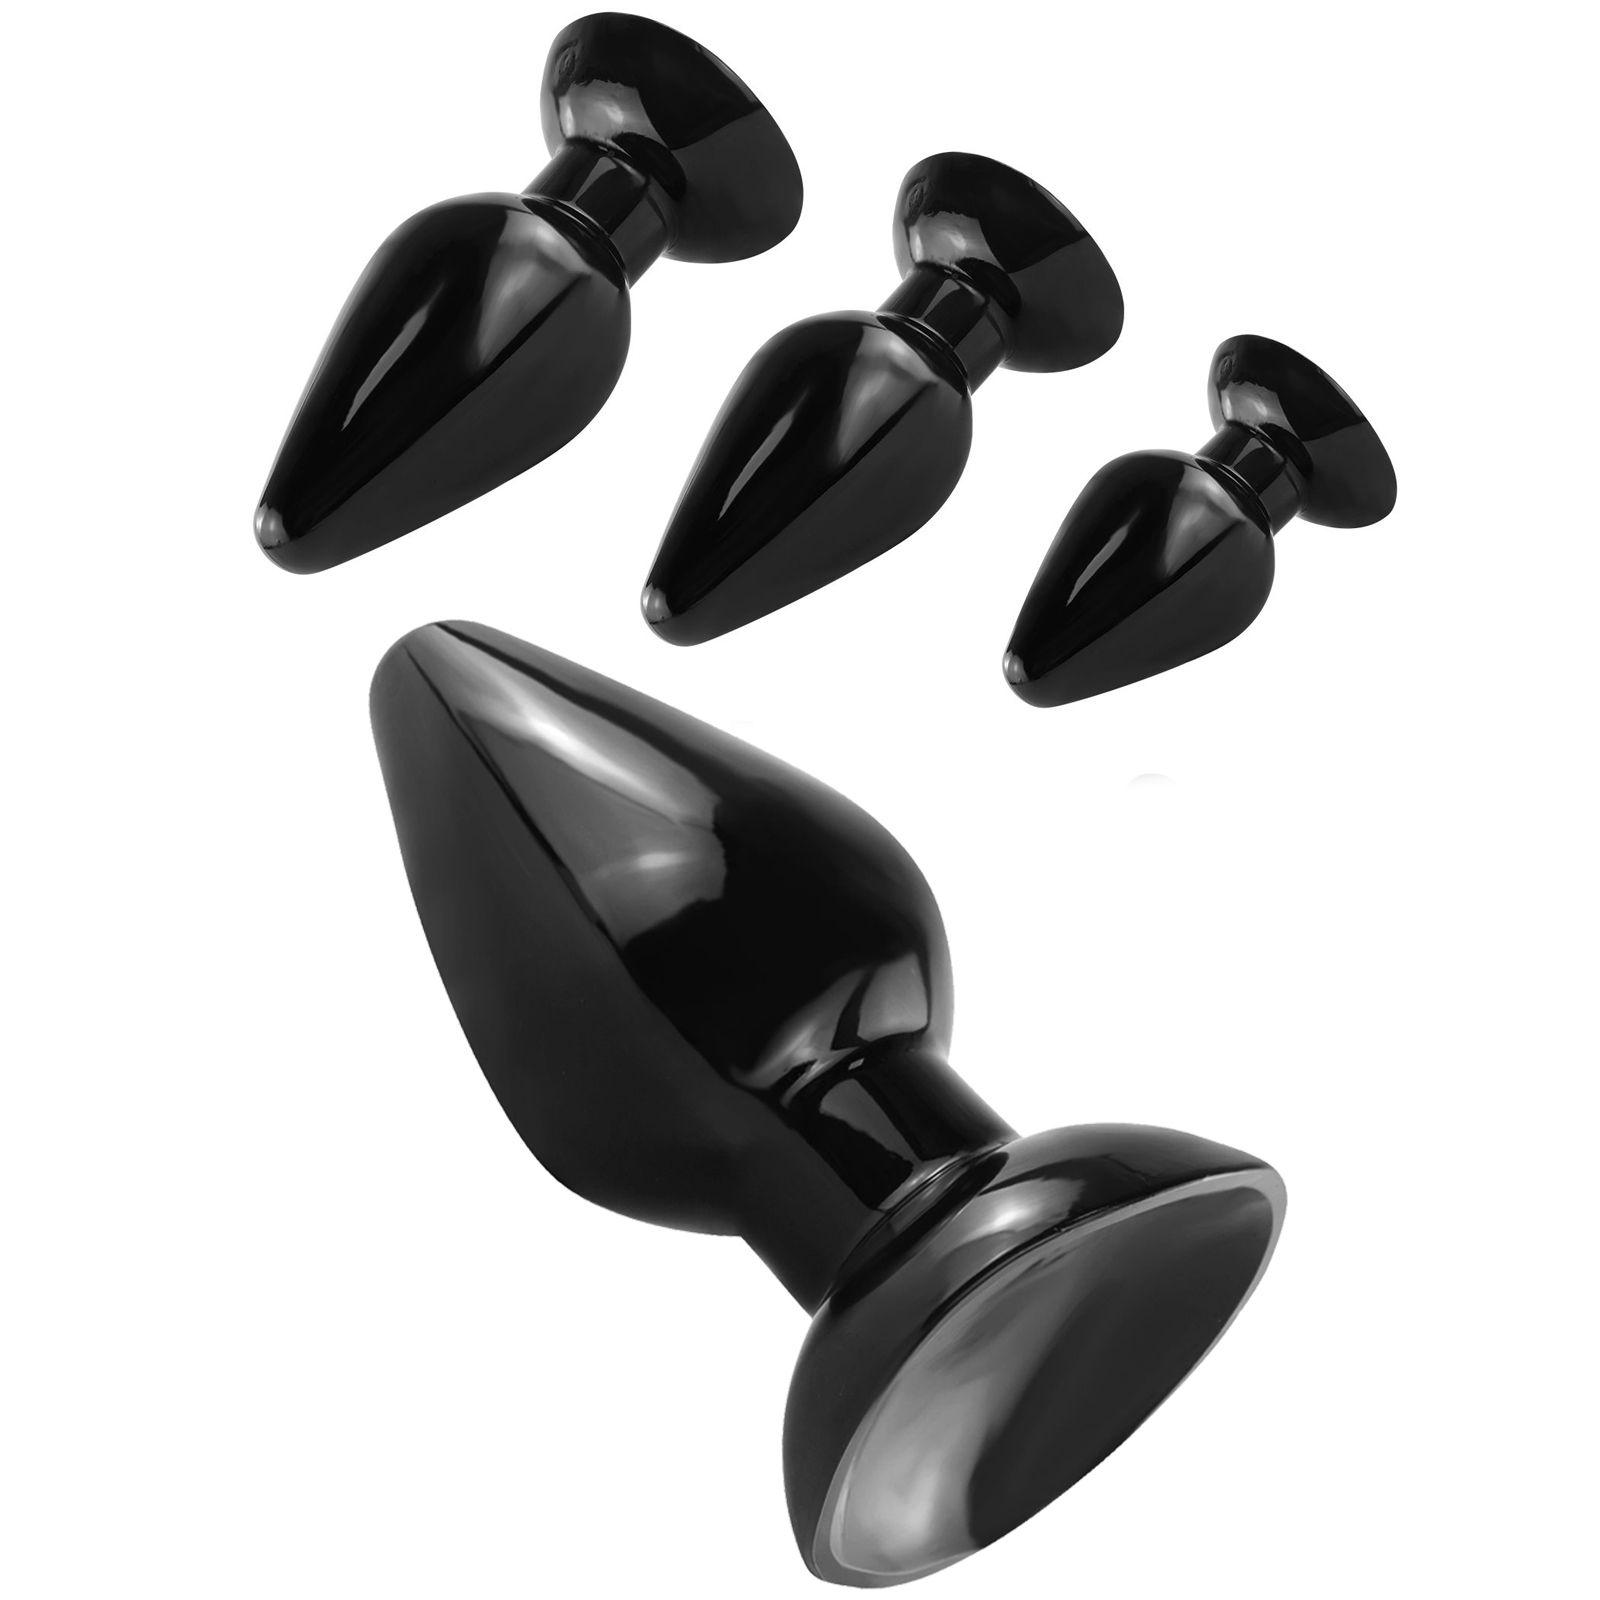 Dia 4.5-7.2cm Super Huge Thick T Shape Xxl Anal Plug Set Butt Plugs Trainer Anus Intercourse Sexy Toy For Men Women And Couple